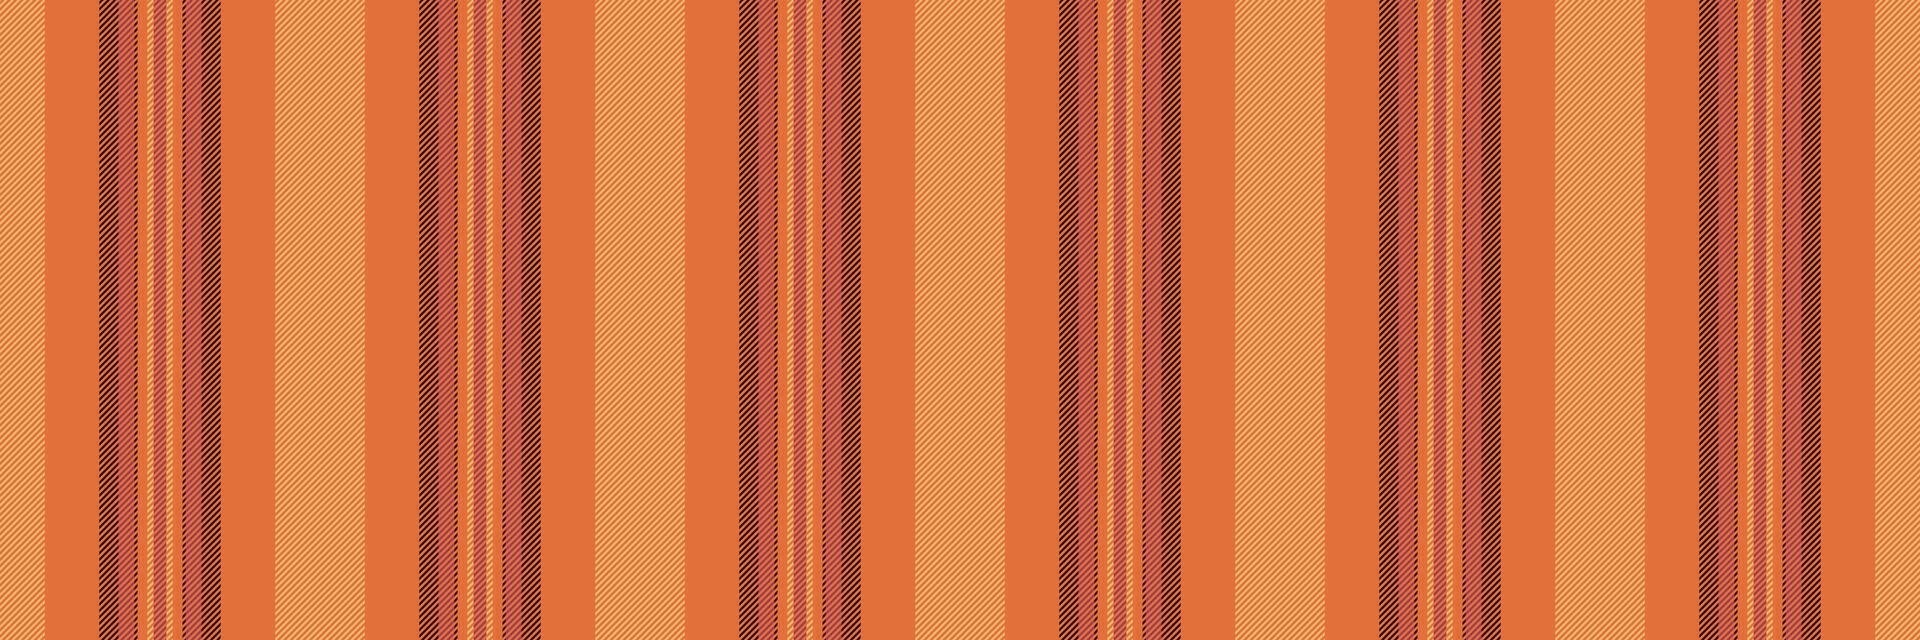 Christmas ornament seamless vector textile, fibre stripe vertical pattern. Fashioned texture lines fabric background in orange and dark colors.